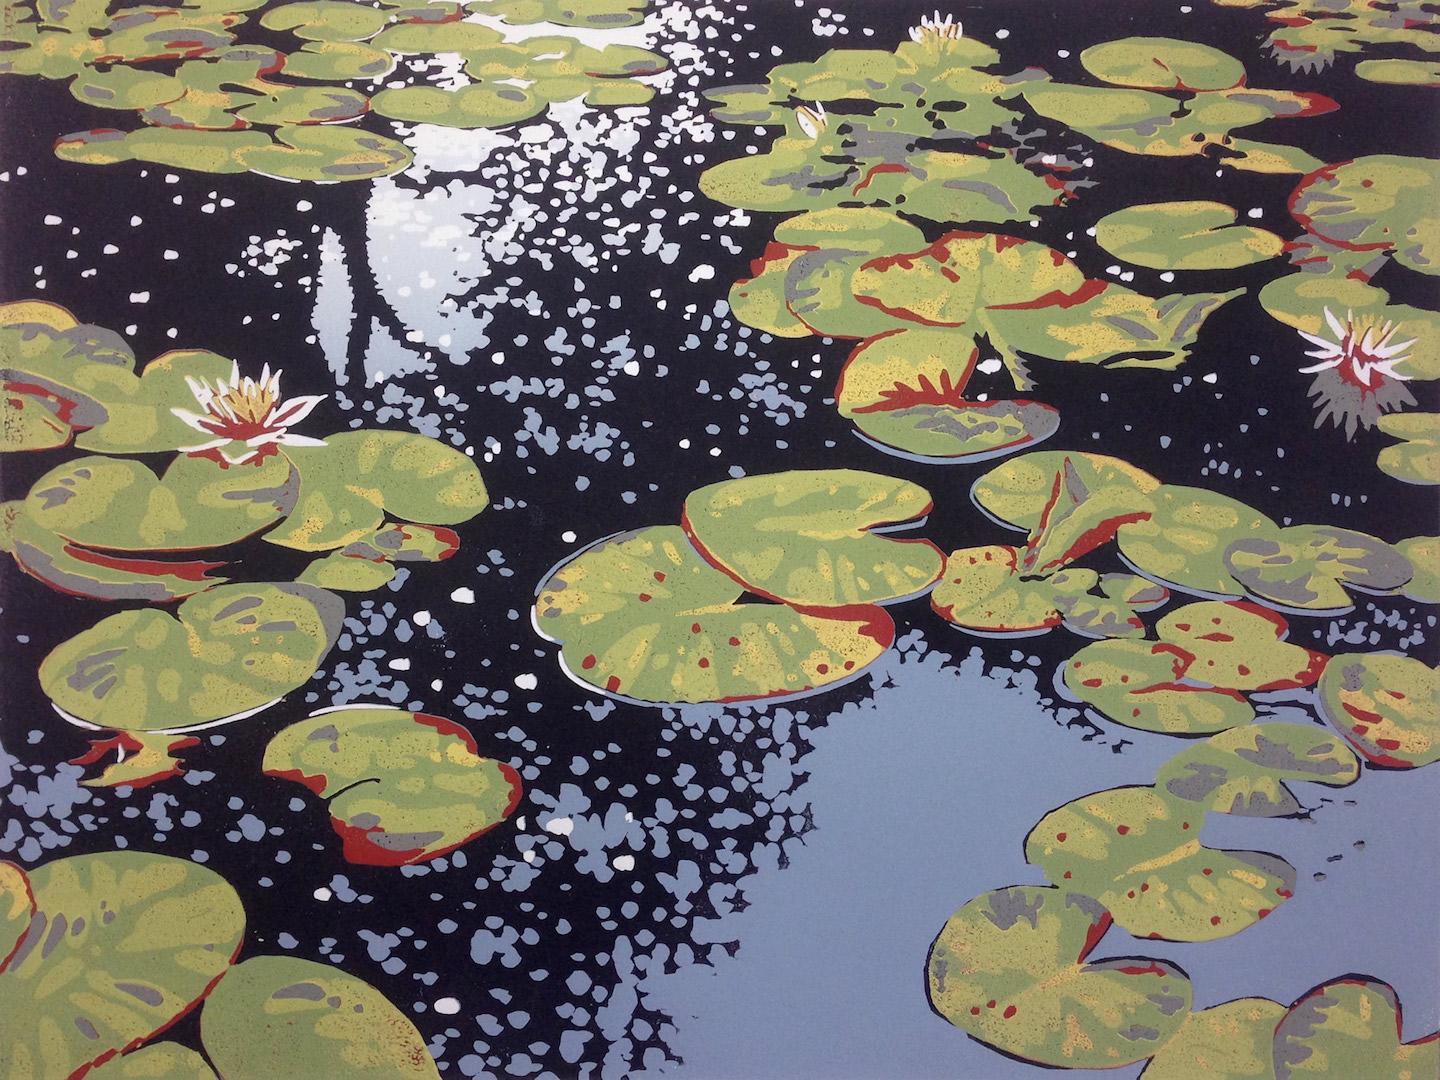 Alexandra Buckle
Lily Pond Reflections
Limited Edition Linocut on Paper
Edition of 9
Sold Unframed
Image size: 30 cm x 40 cm x 0 cm
Sheet Size: 37 cm x 47 cm x 0 cm

Reduction linocut of lilies on a pond with a reflected tree. This is one of a small